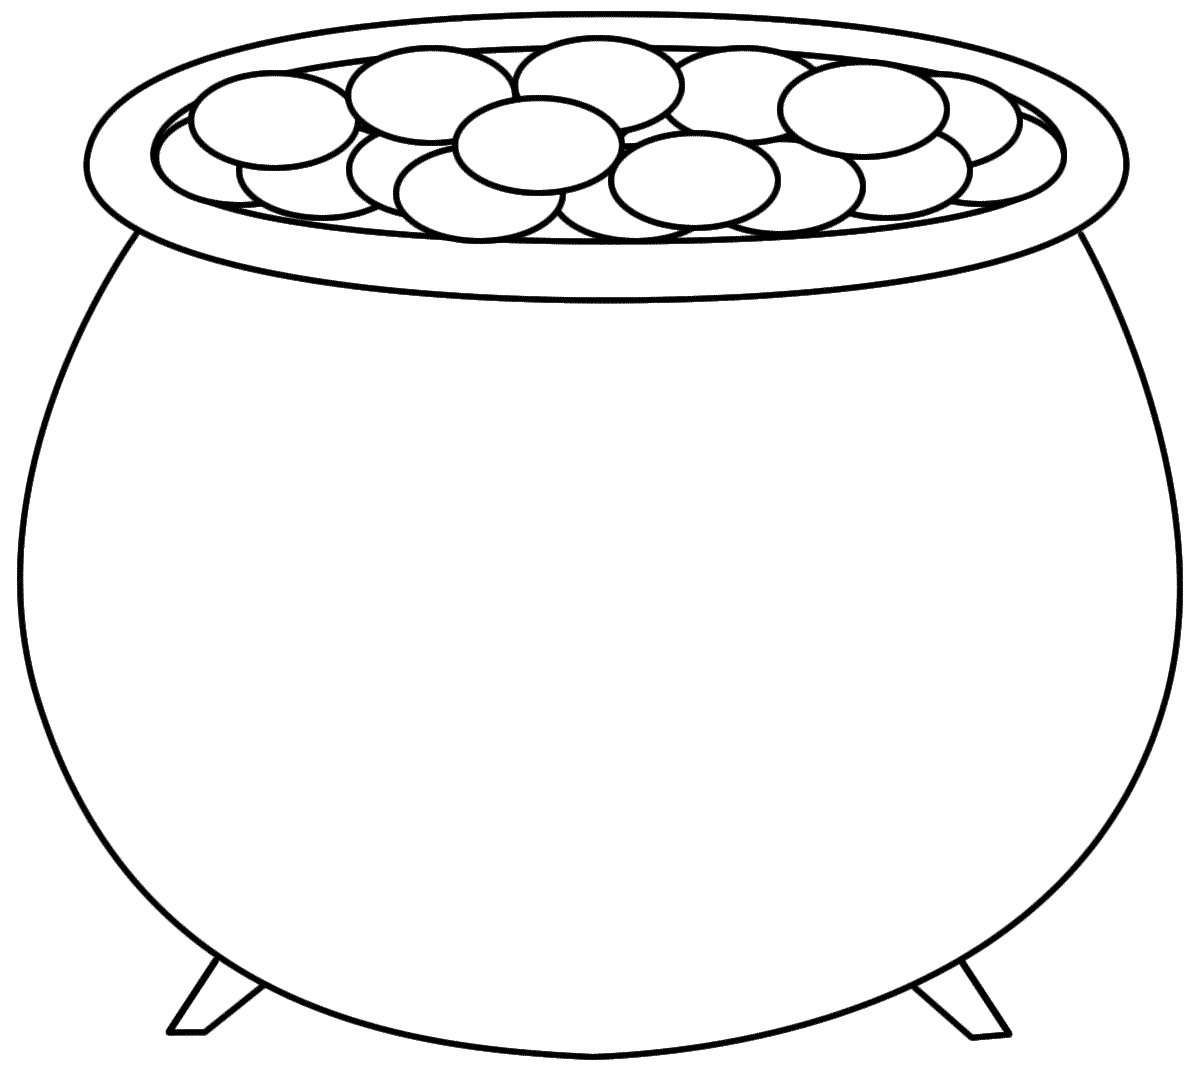     Pot Of Gold Coloring Page   Clipart Panda   Free Clipart Images